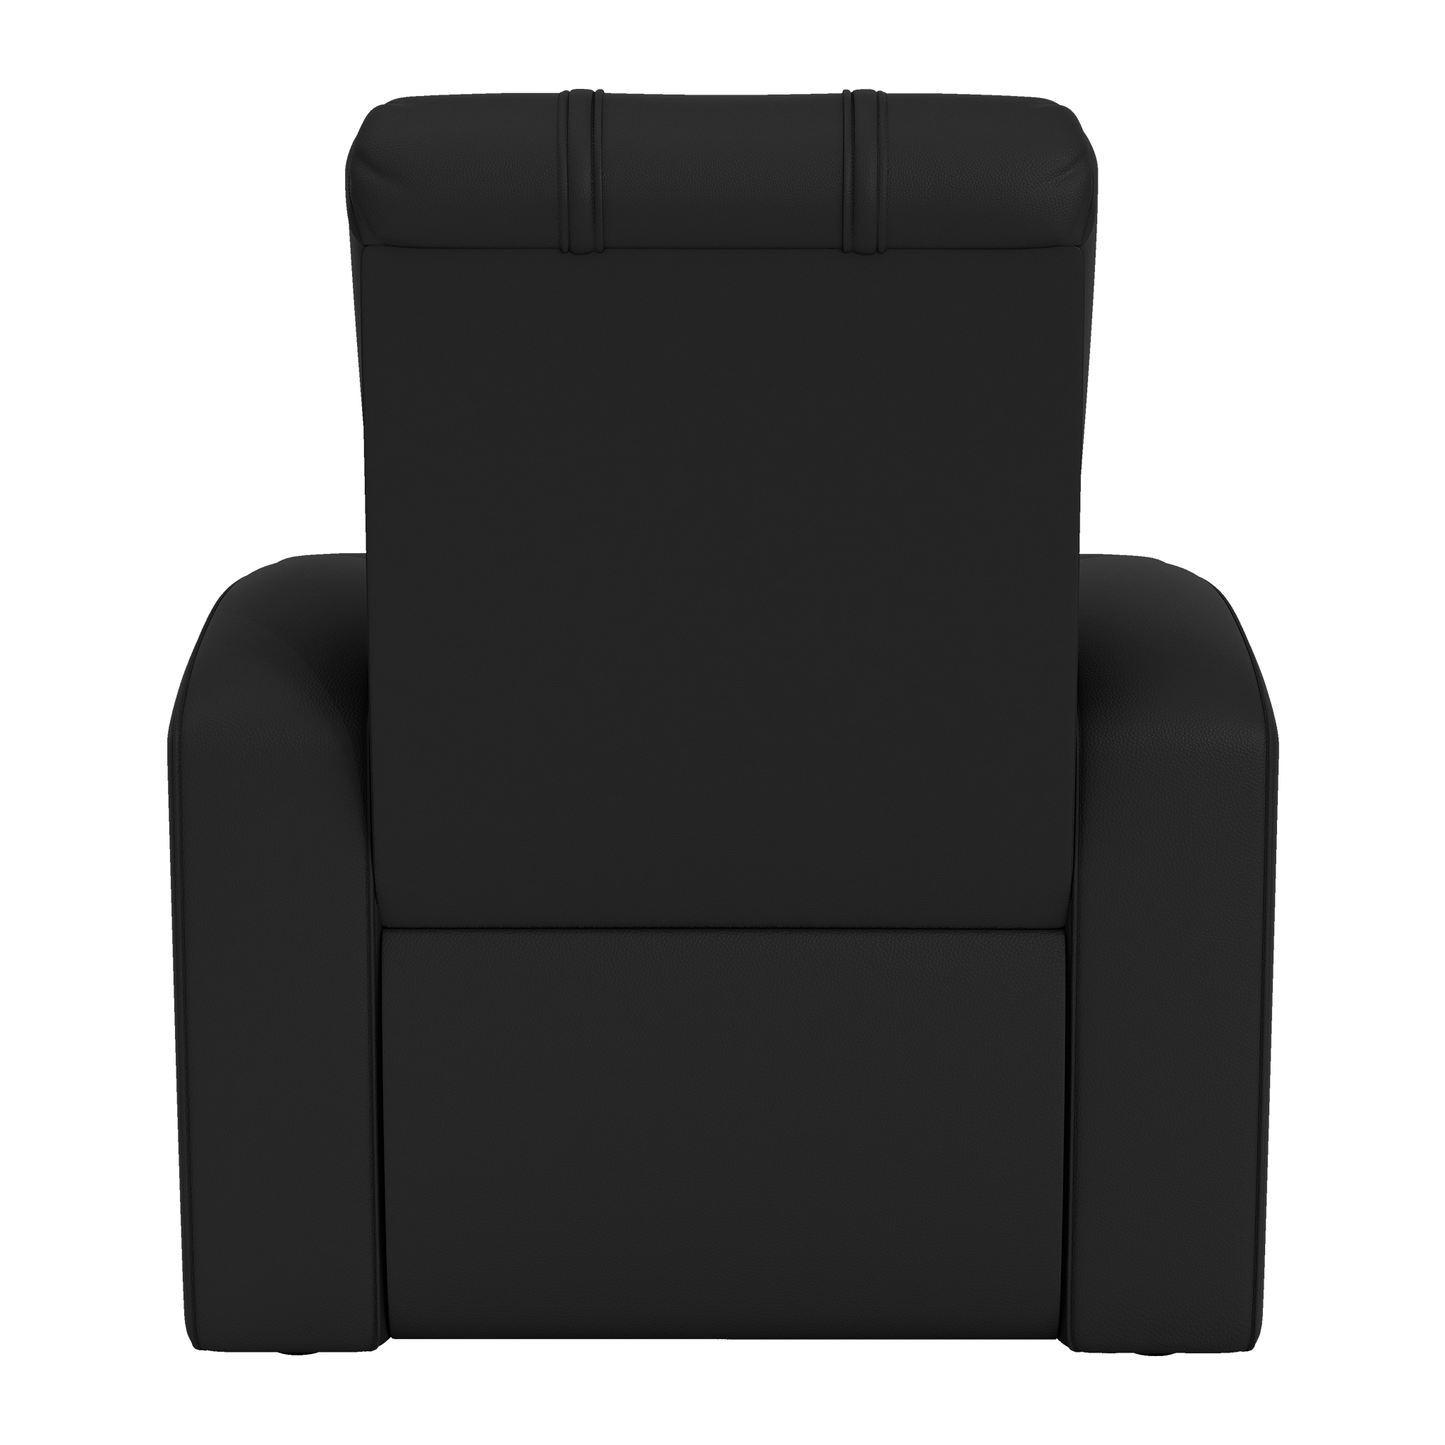 Relax Home Theater Recliner with GMC Primary Logo